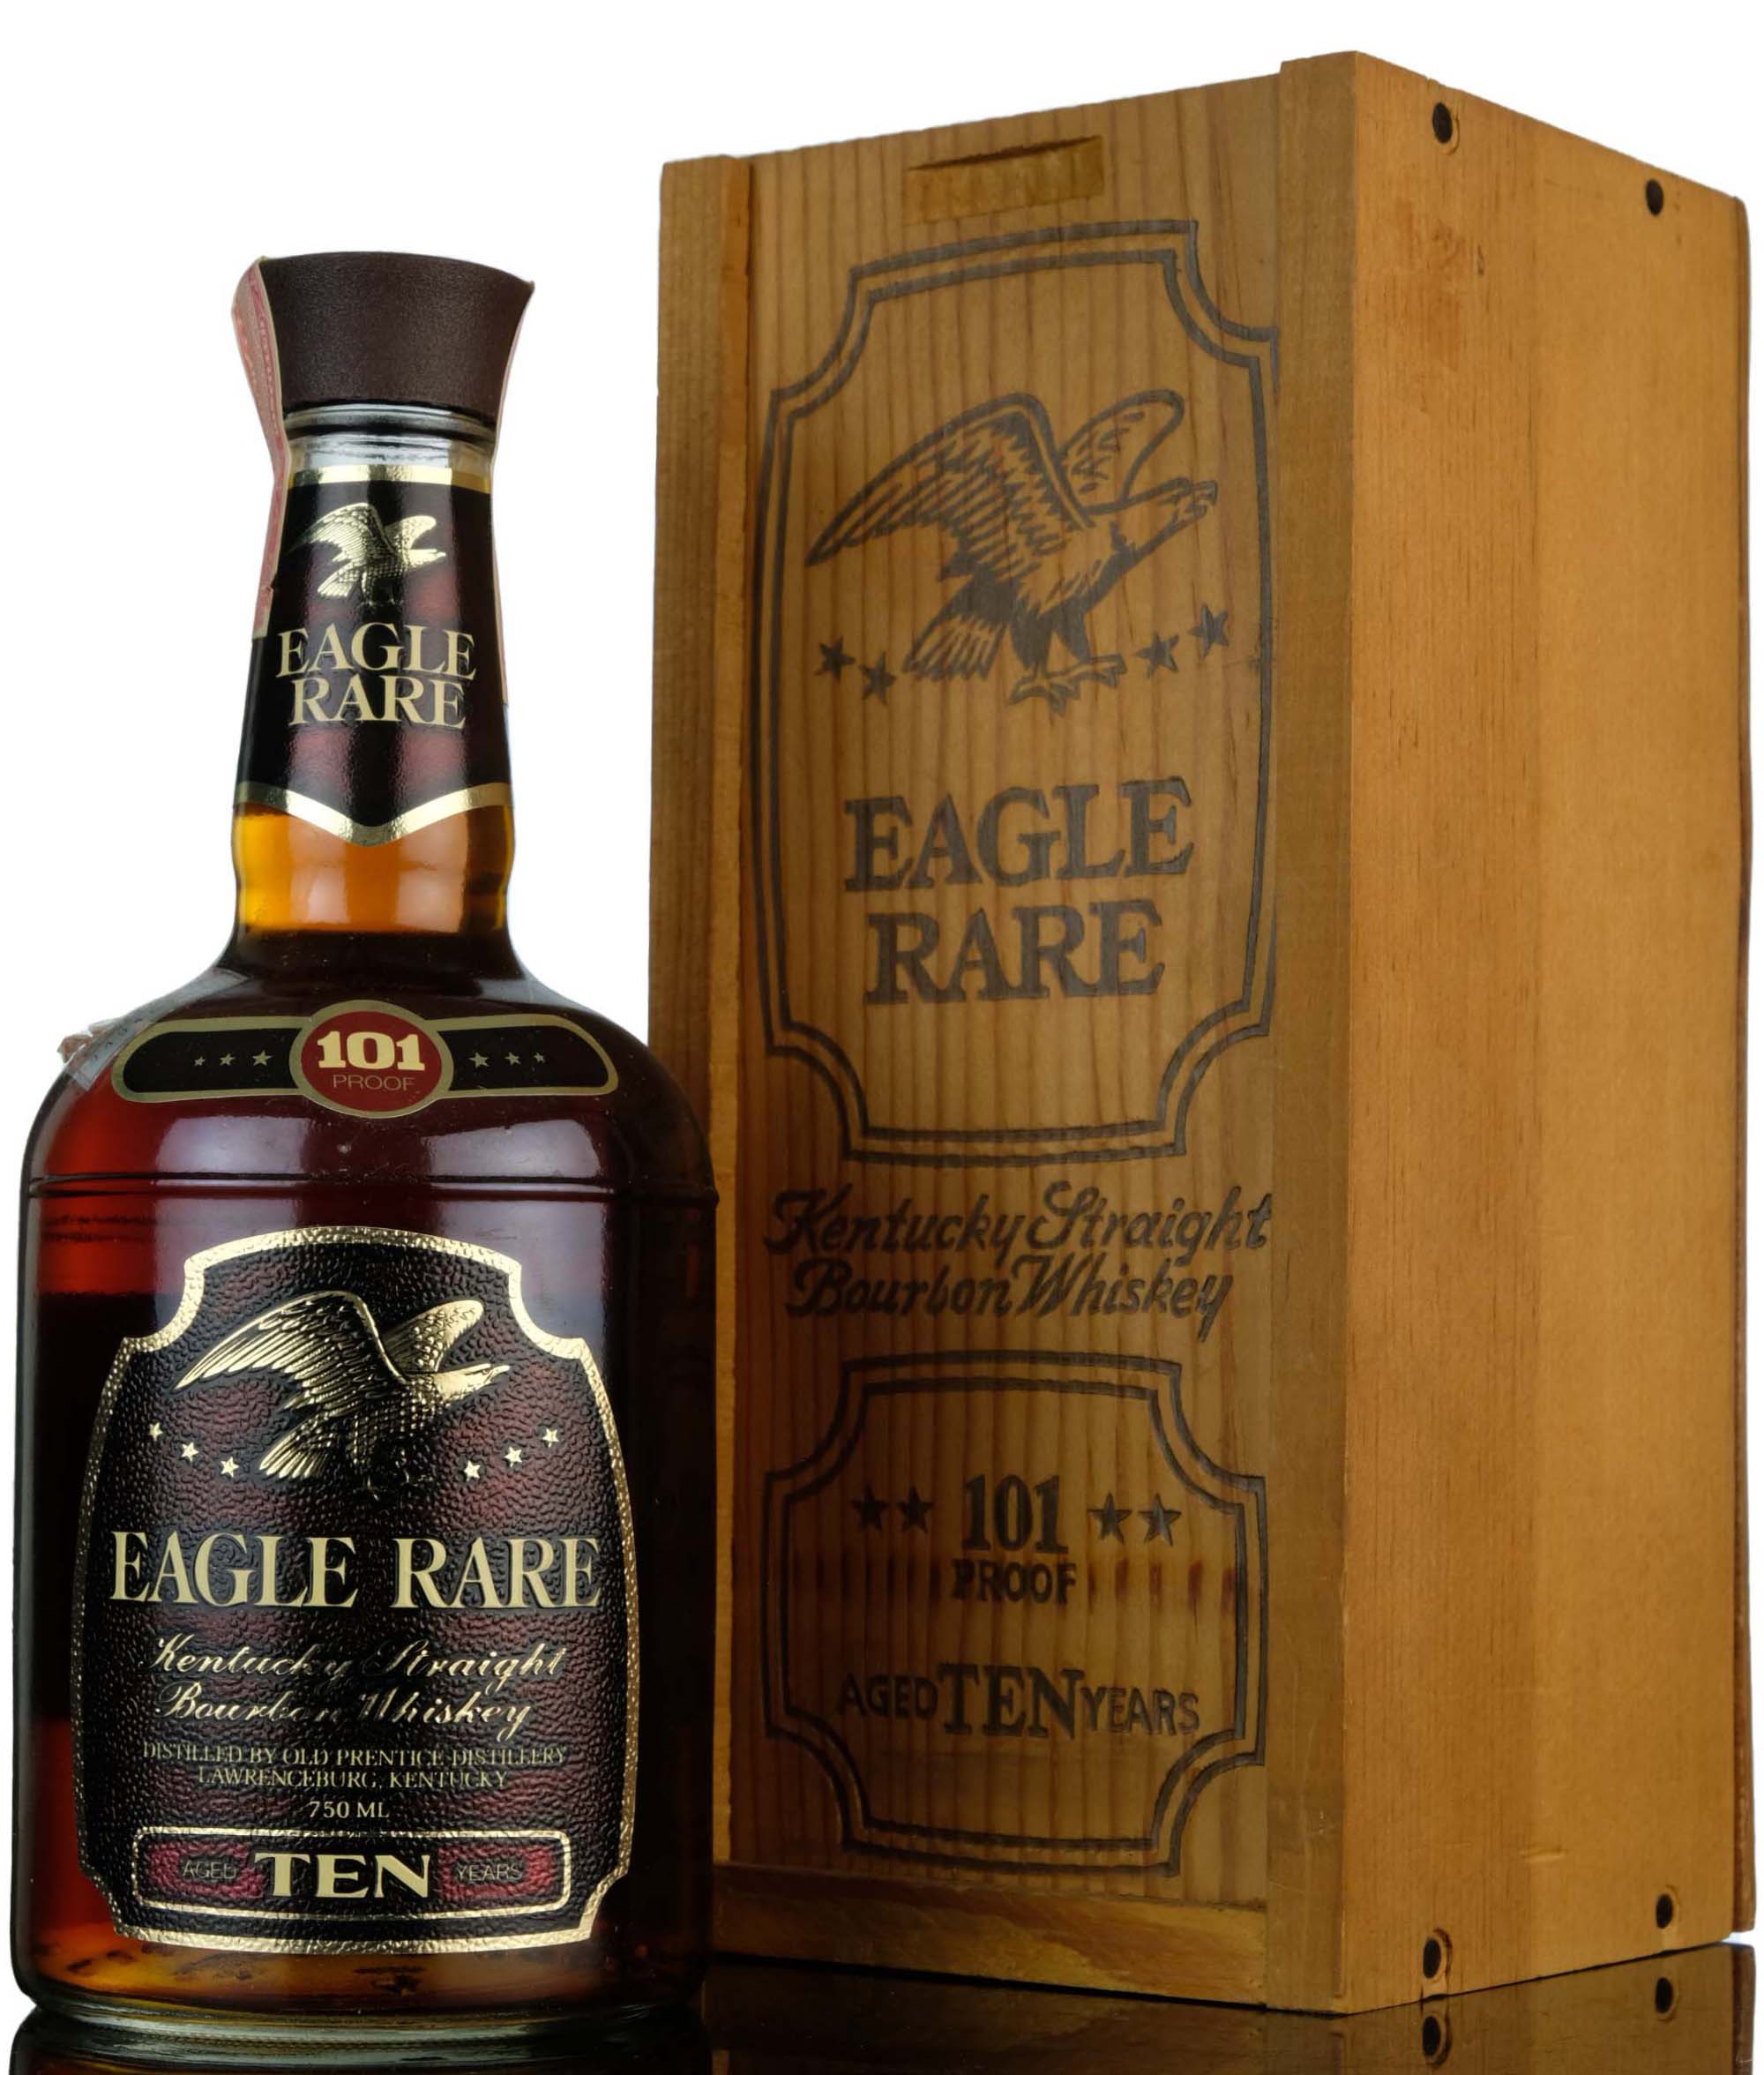 Eagle Rare 10 Year Old - 101 Proof - 1983 Release